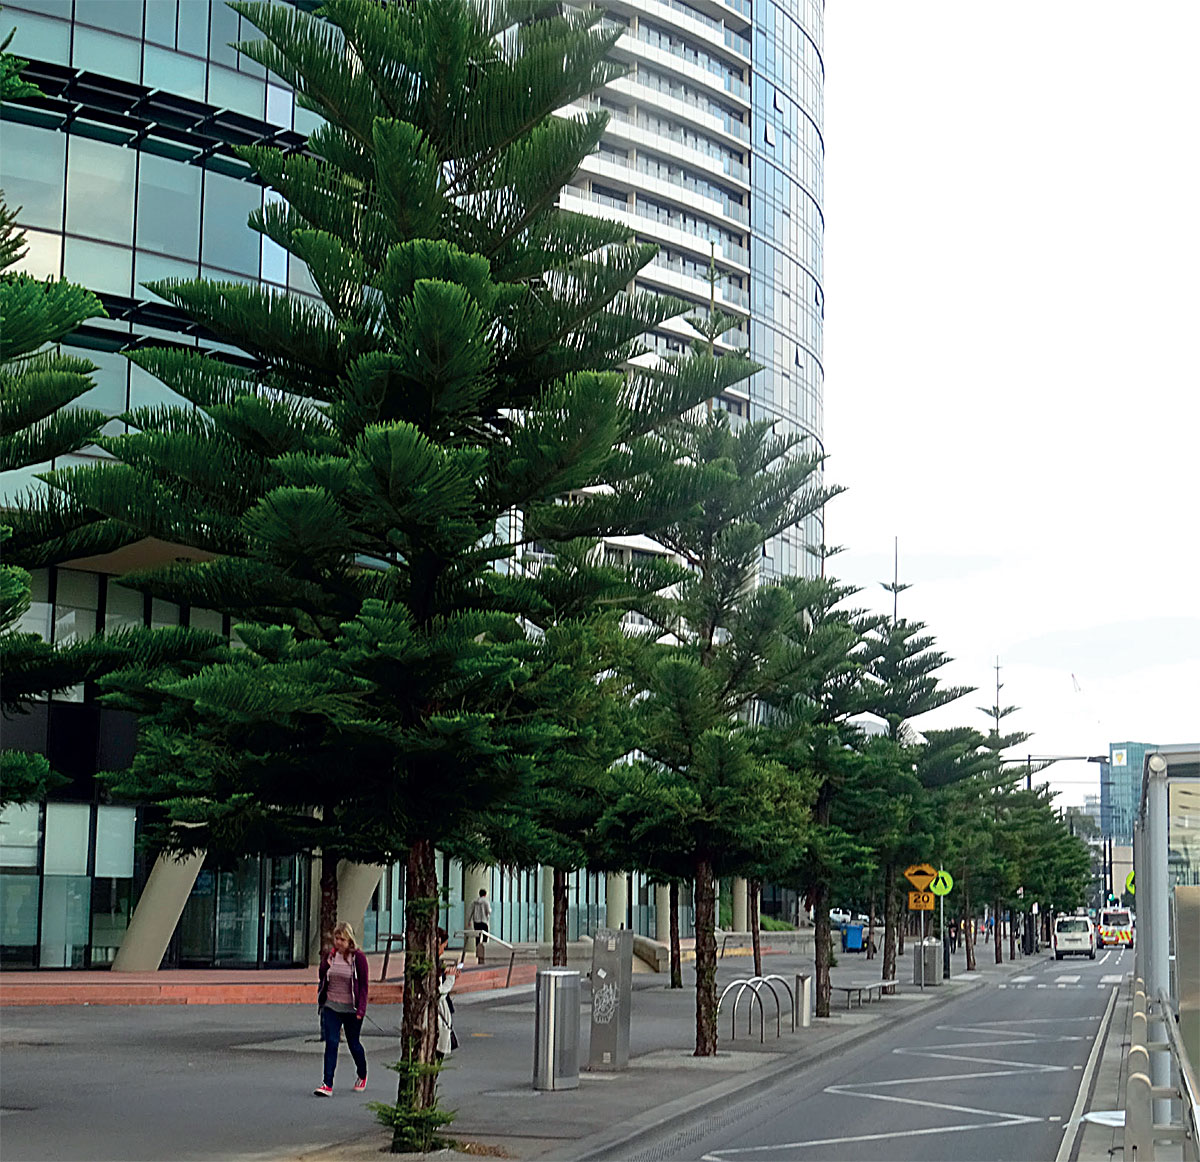 An avenue planting of Norfolk Island pine in the docklands area of Melbourne, one of the least tree covered areas of the city